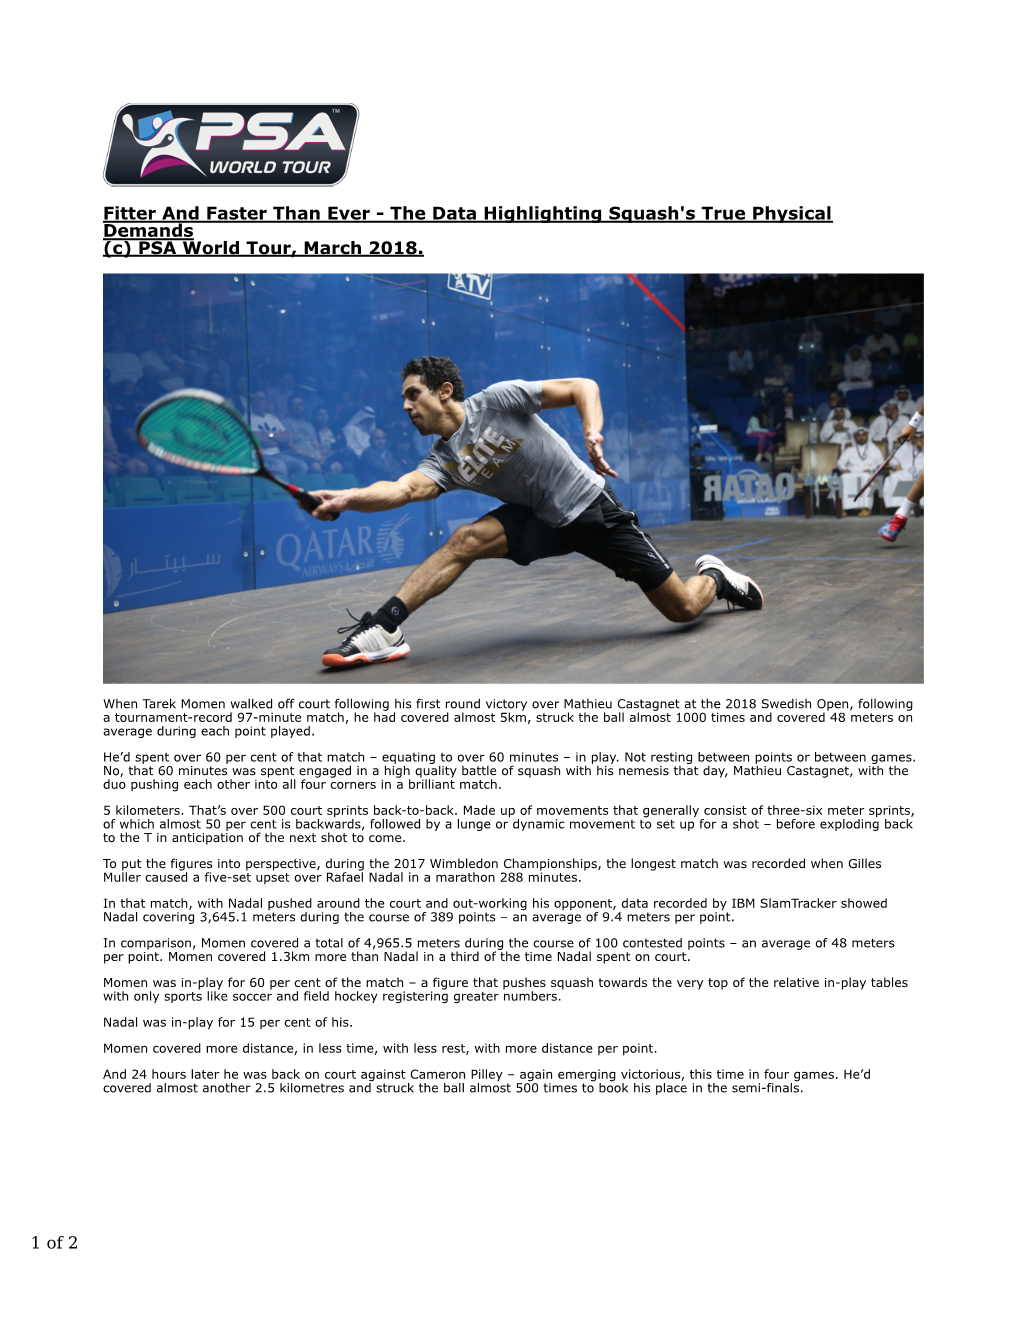 The Data Highlighting Squash's True Physical Demands (C) PSA World Tour, March 2018